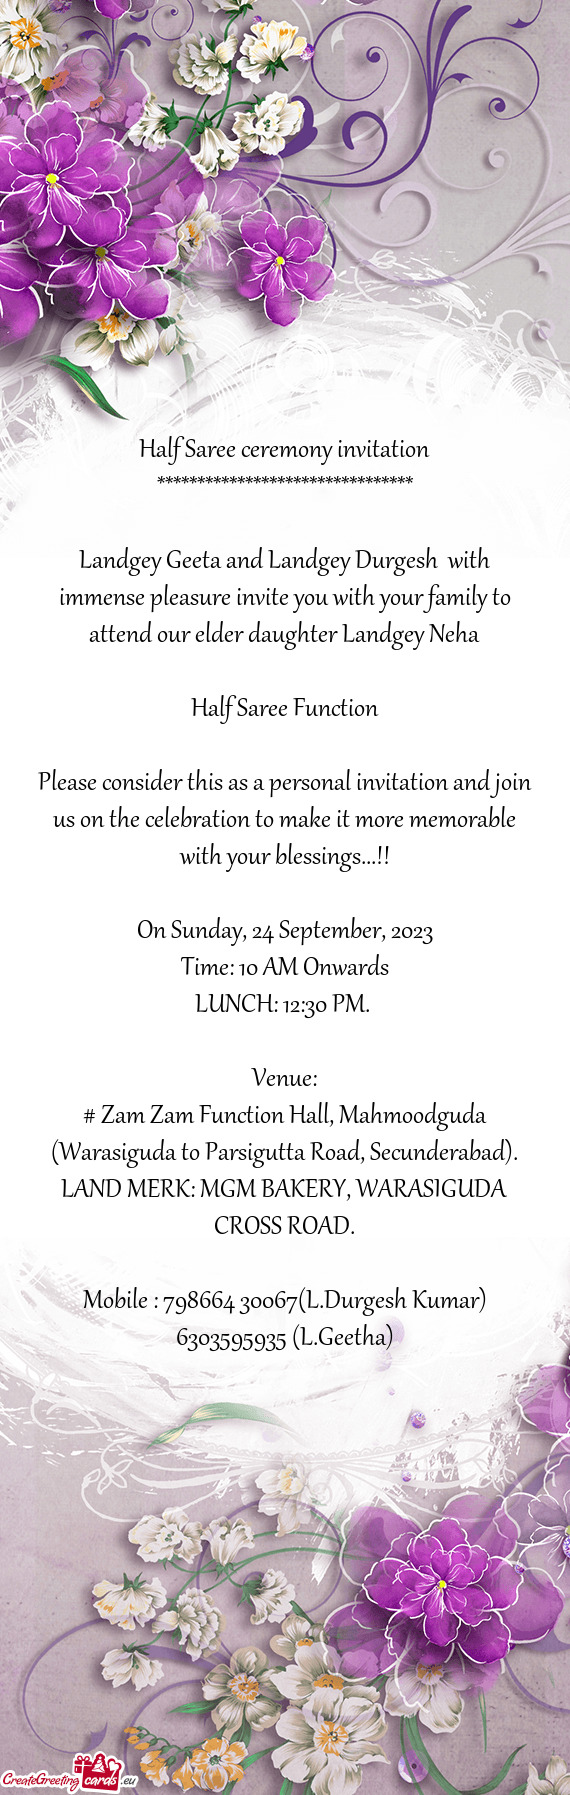 Landgey Geeta and Landgey Durgesh with immense pleasure invite you with your family to attend our e